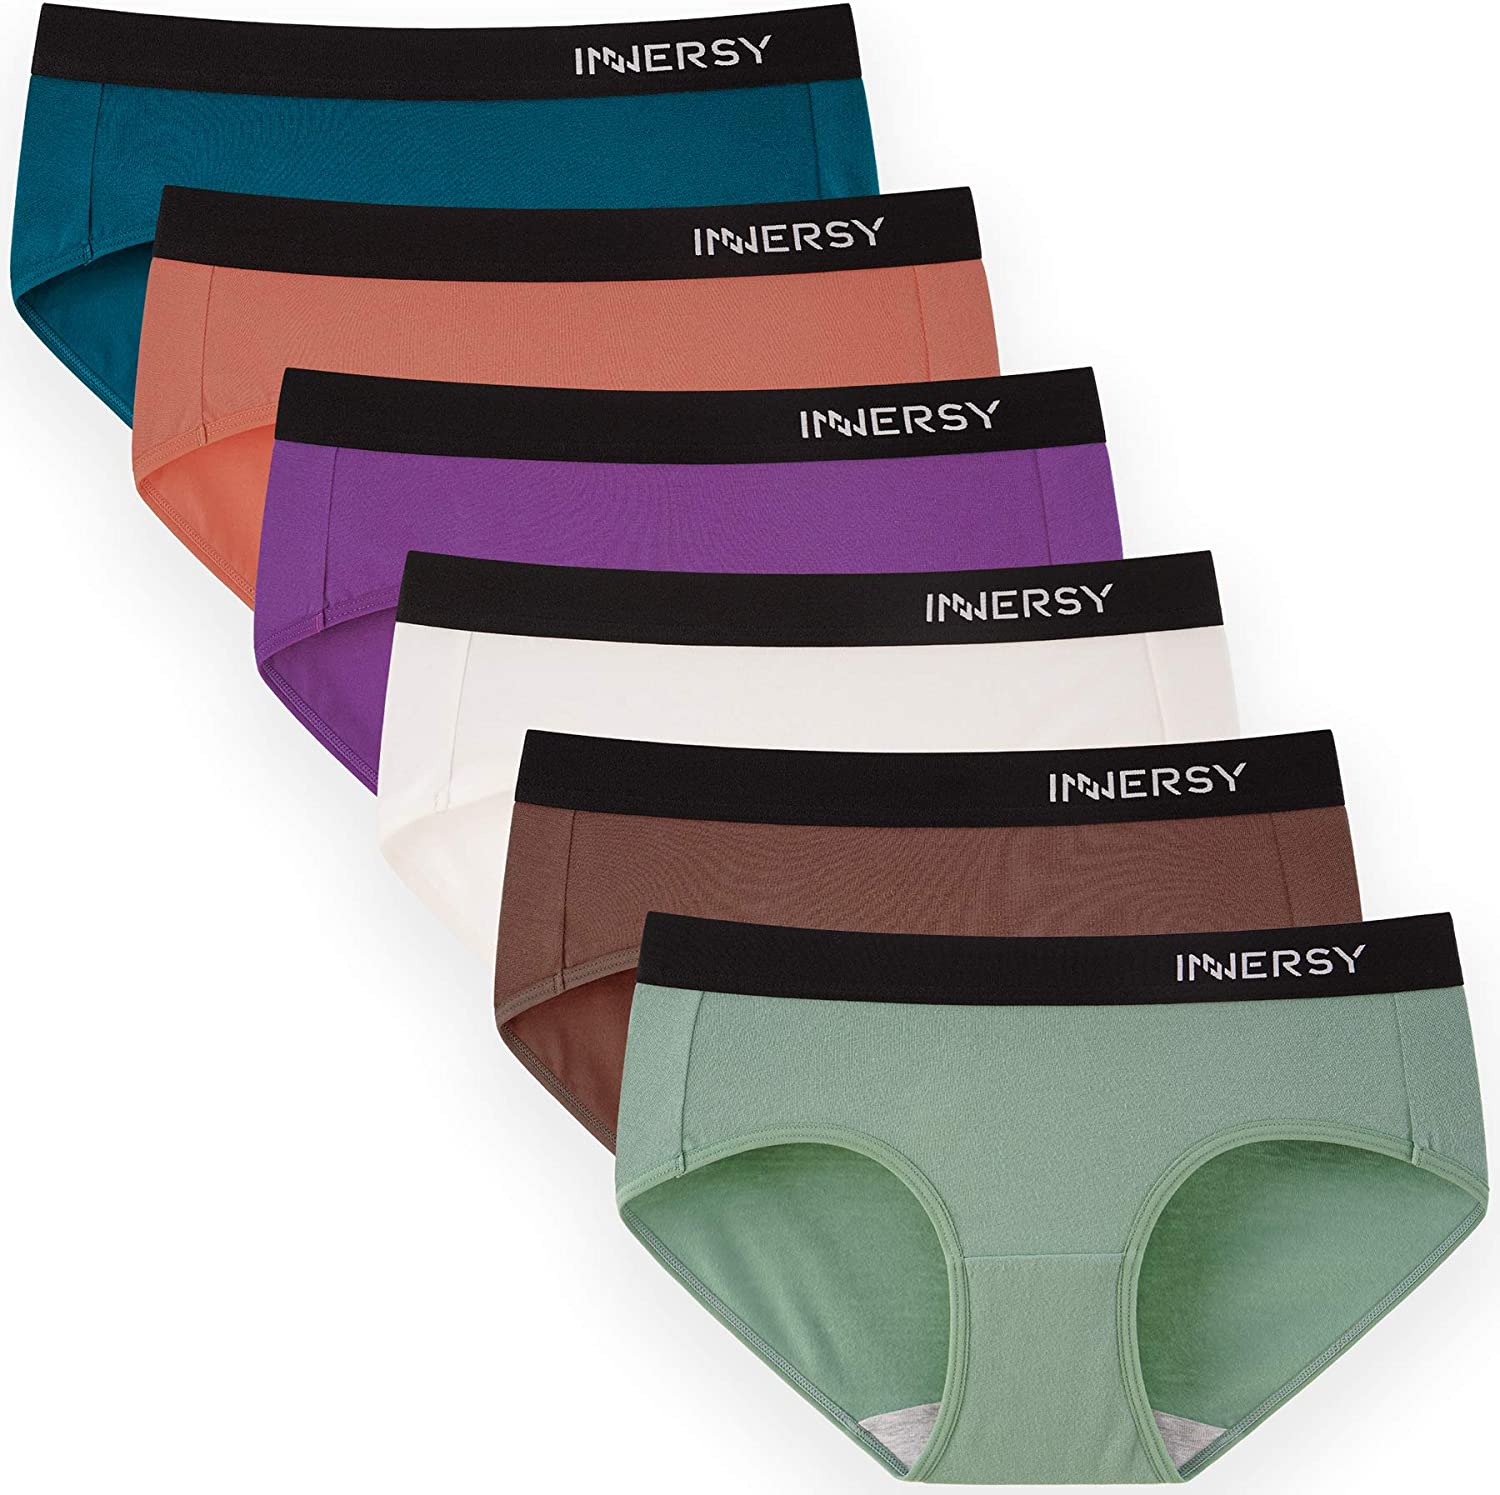 INNERSY Womens Underwear Hipster Panties Cotton Low Rise Briefs Pack of 6 | eBay